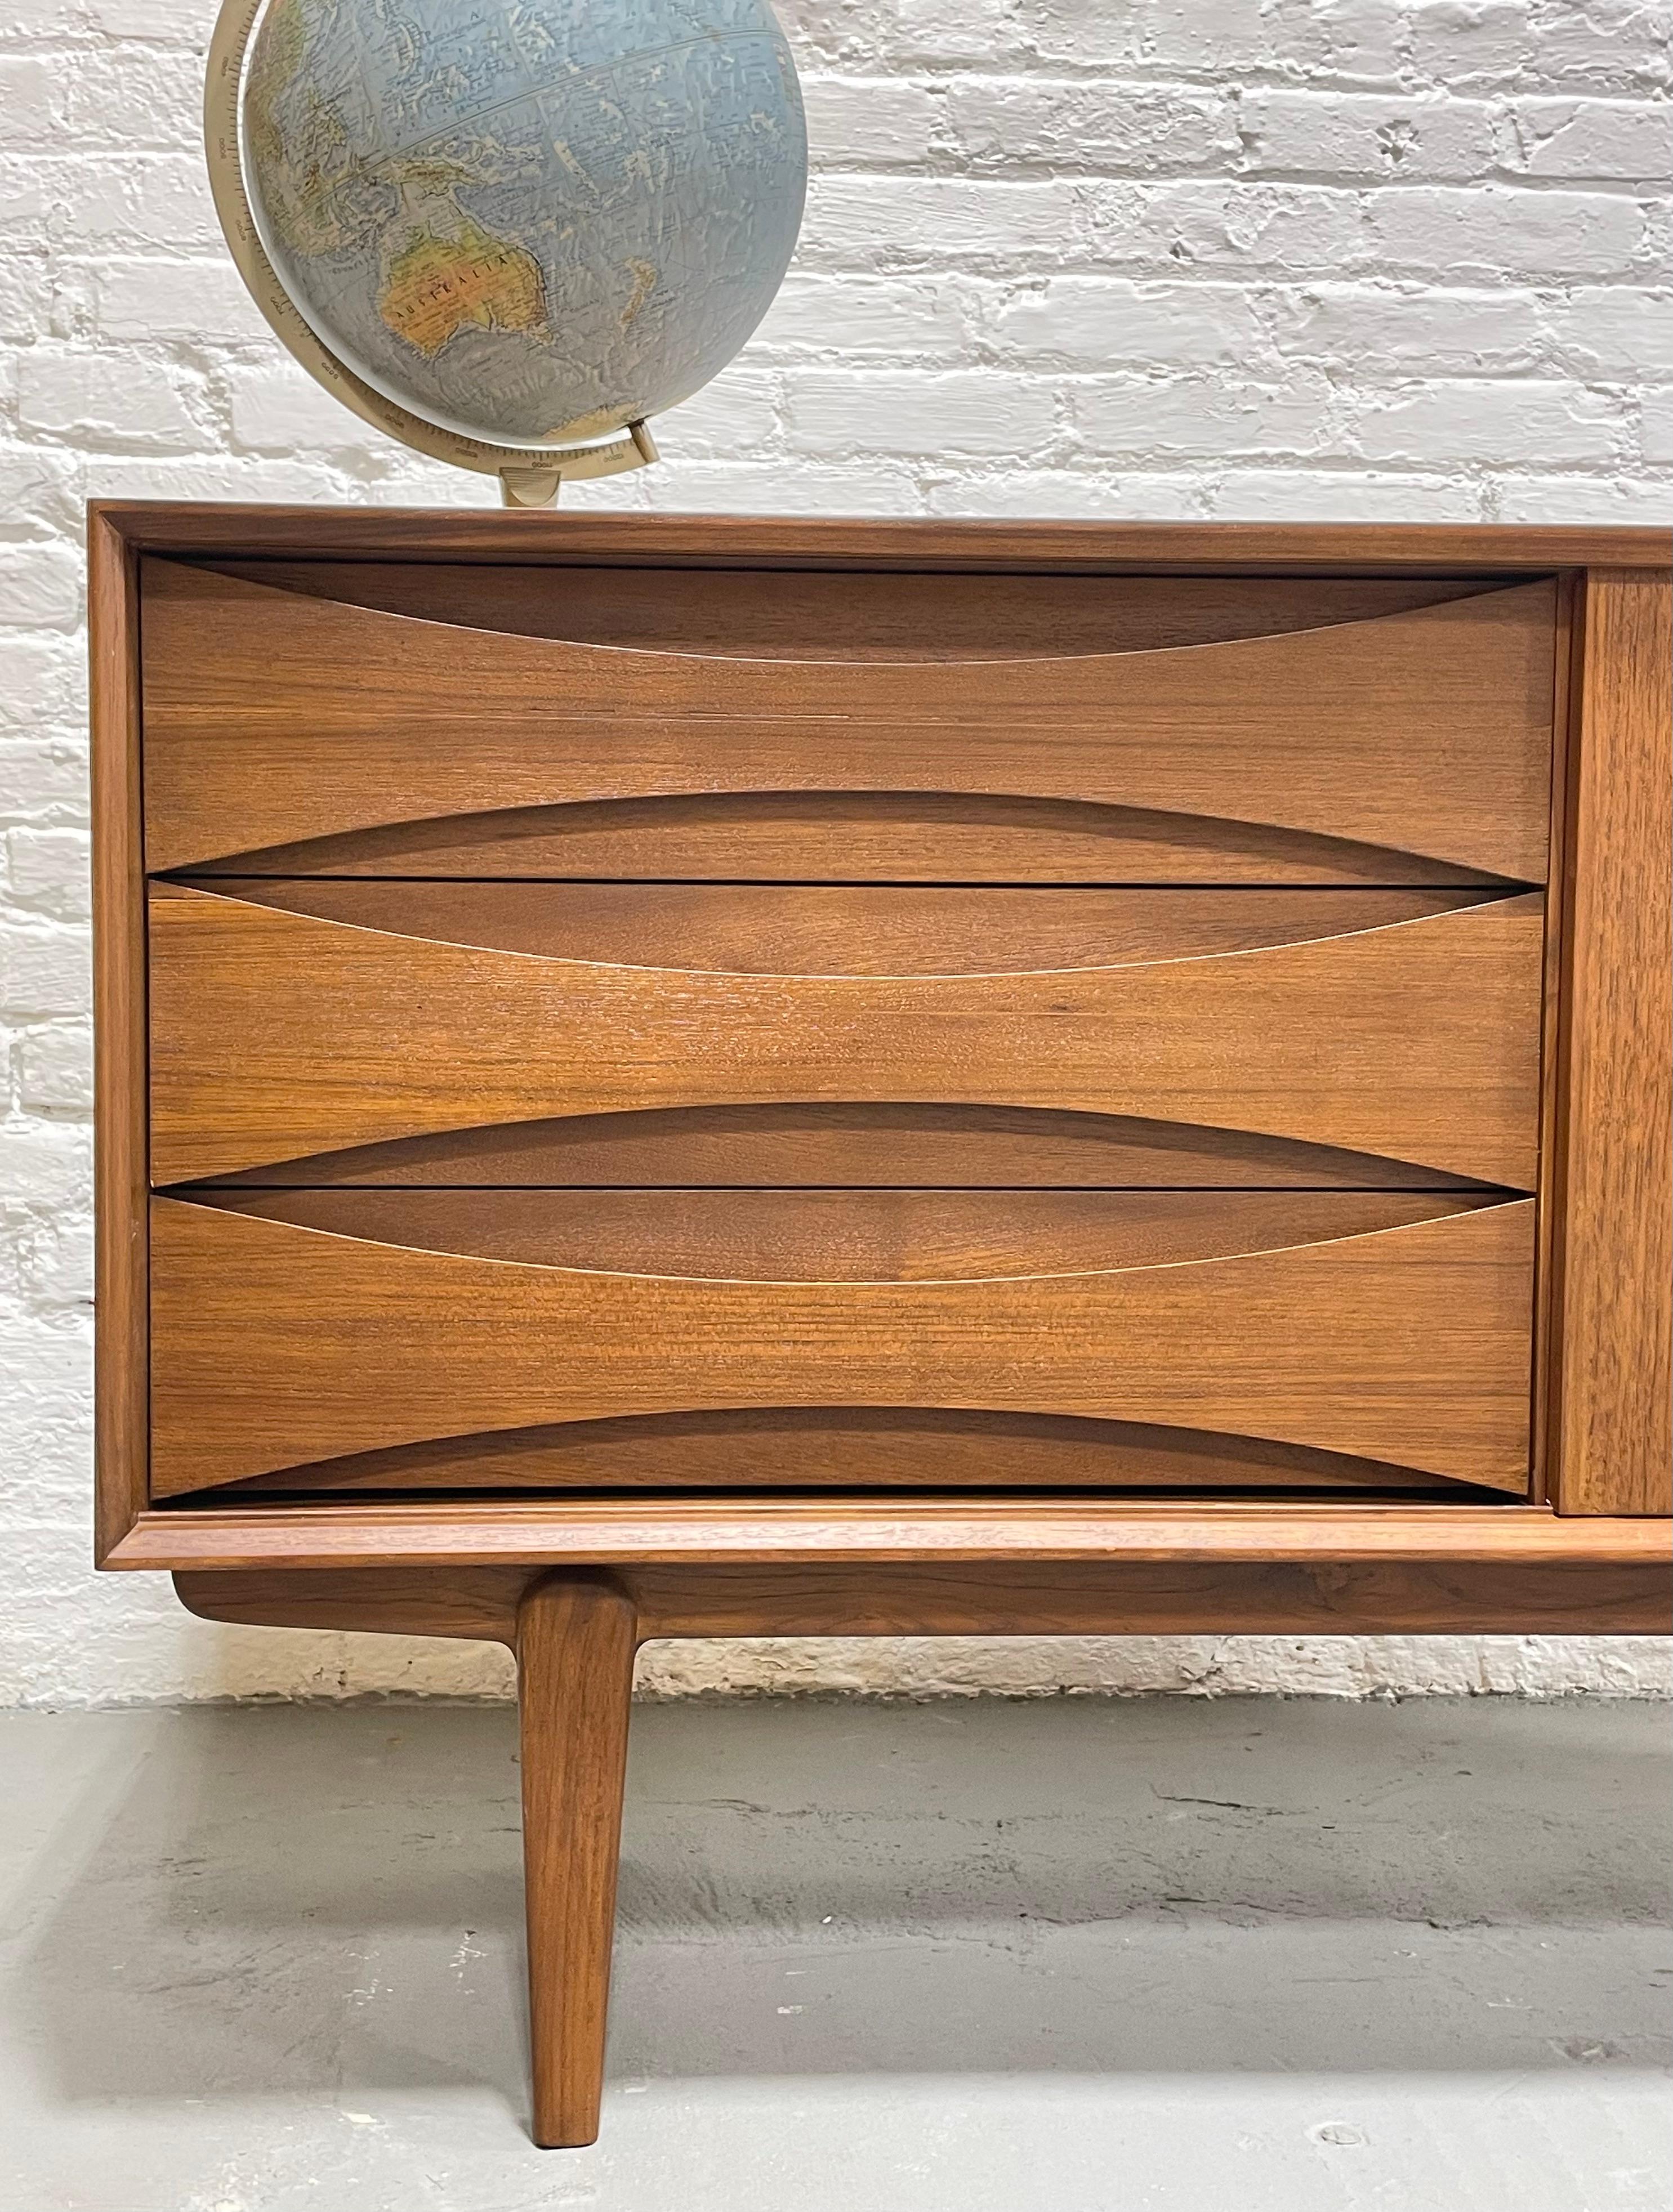 Contemporary APARTMENT sized Mid Century MODERN styled Teak CREDENZA media stand For Sale